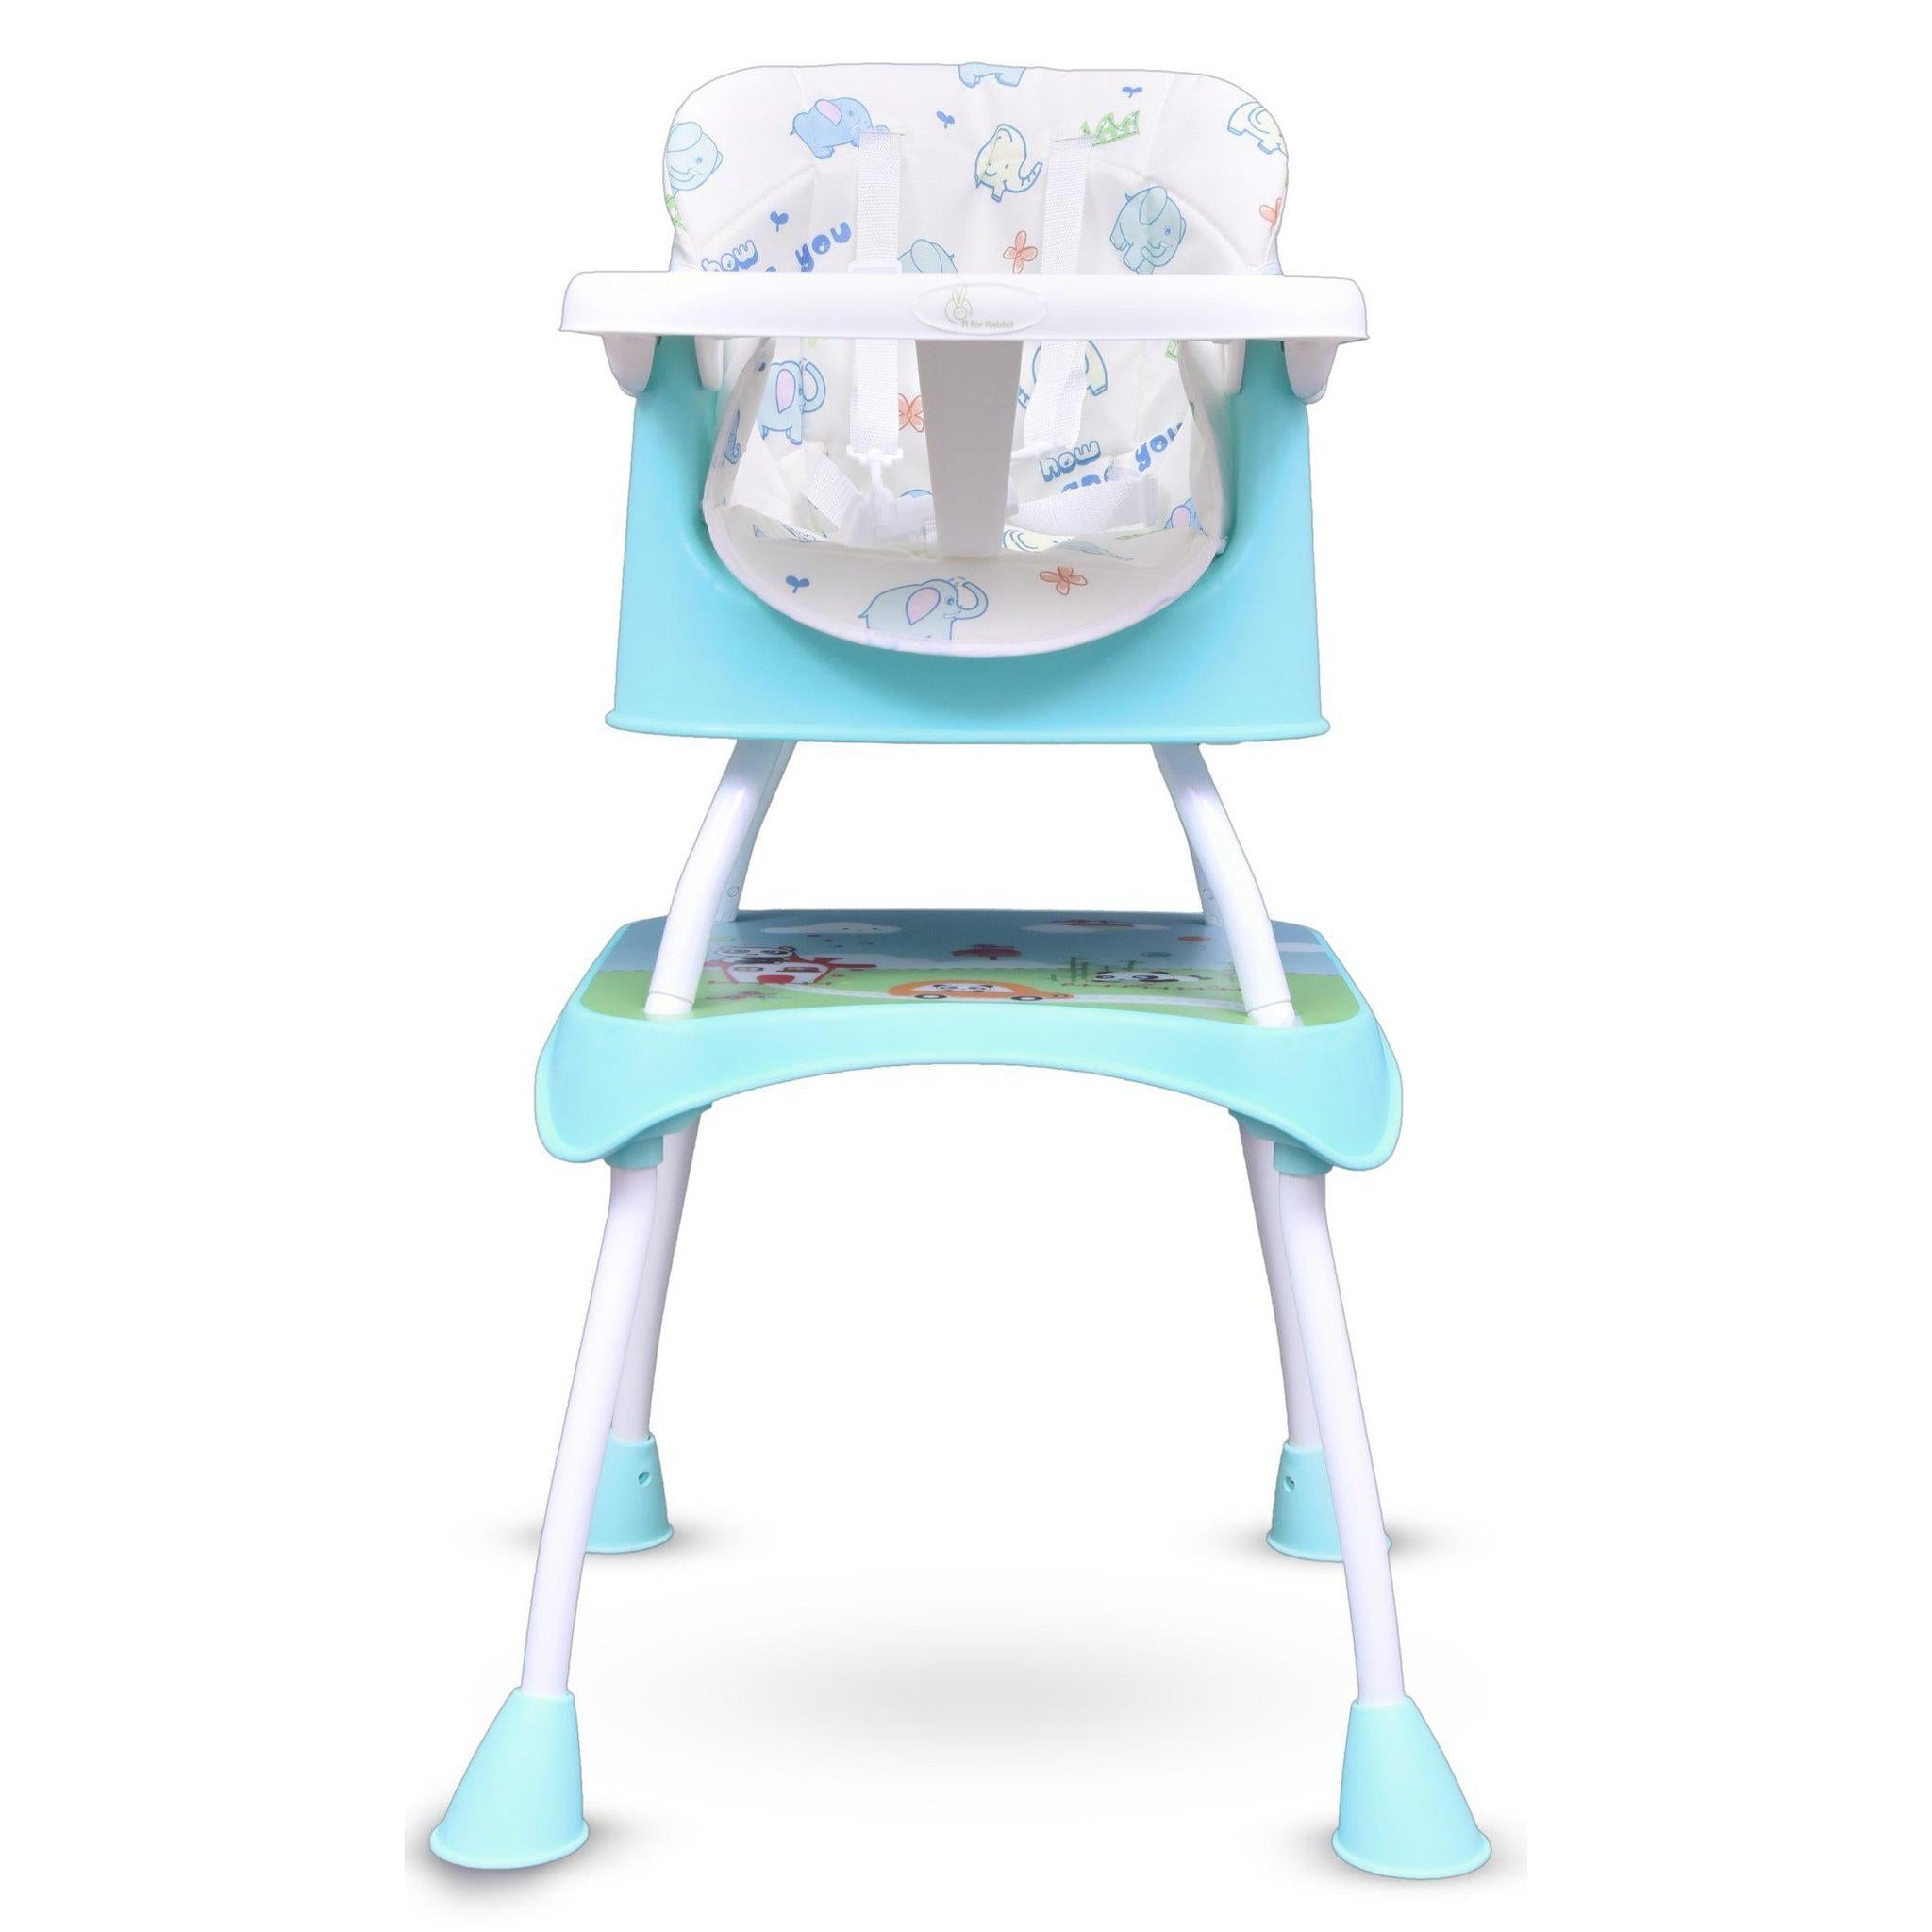 R FOR RABBIT Cherry Berry Grand Convertible 4 in 1 Feeding High Chair for Baby of 6 Month to 7 years